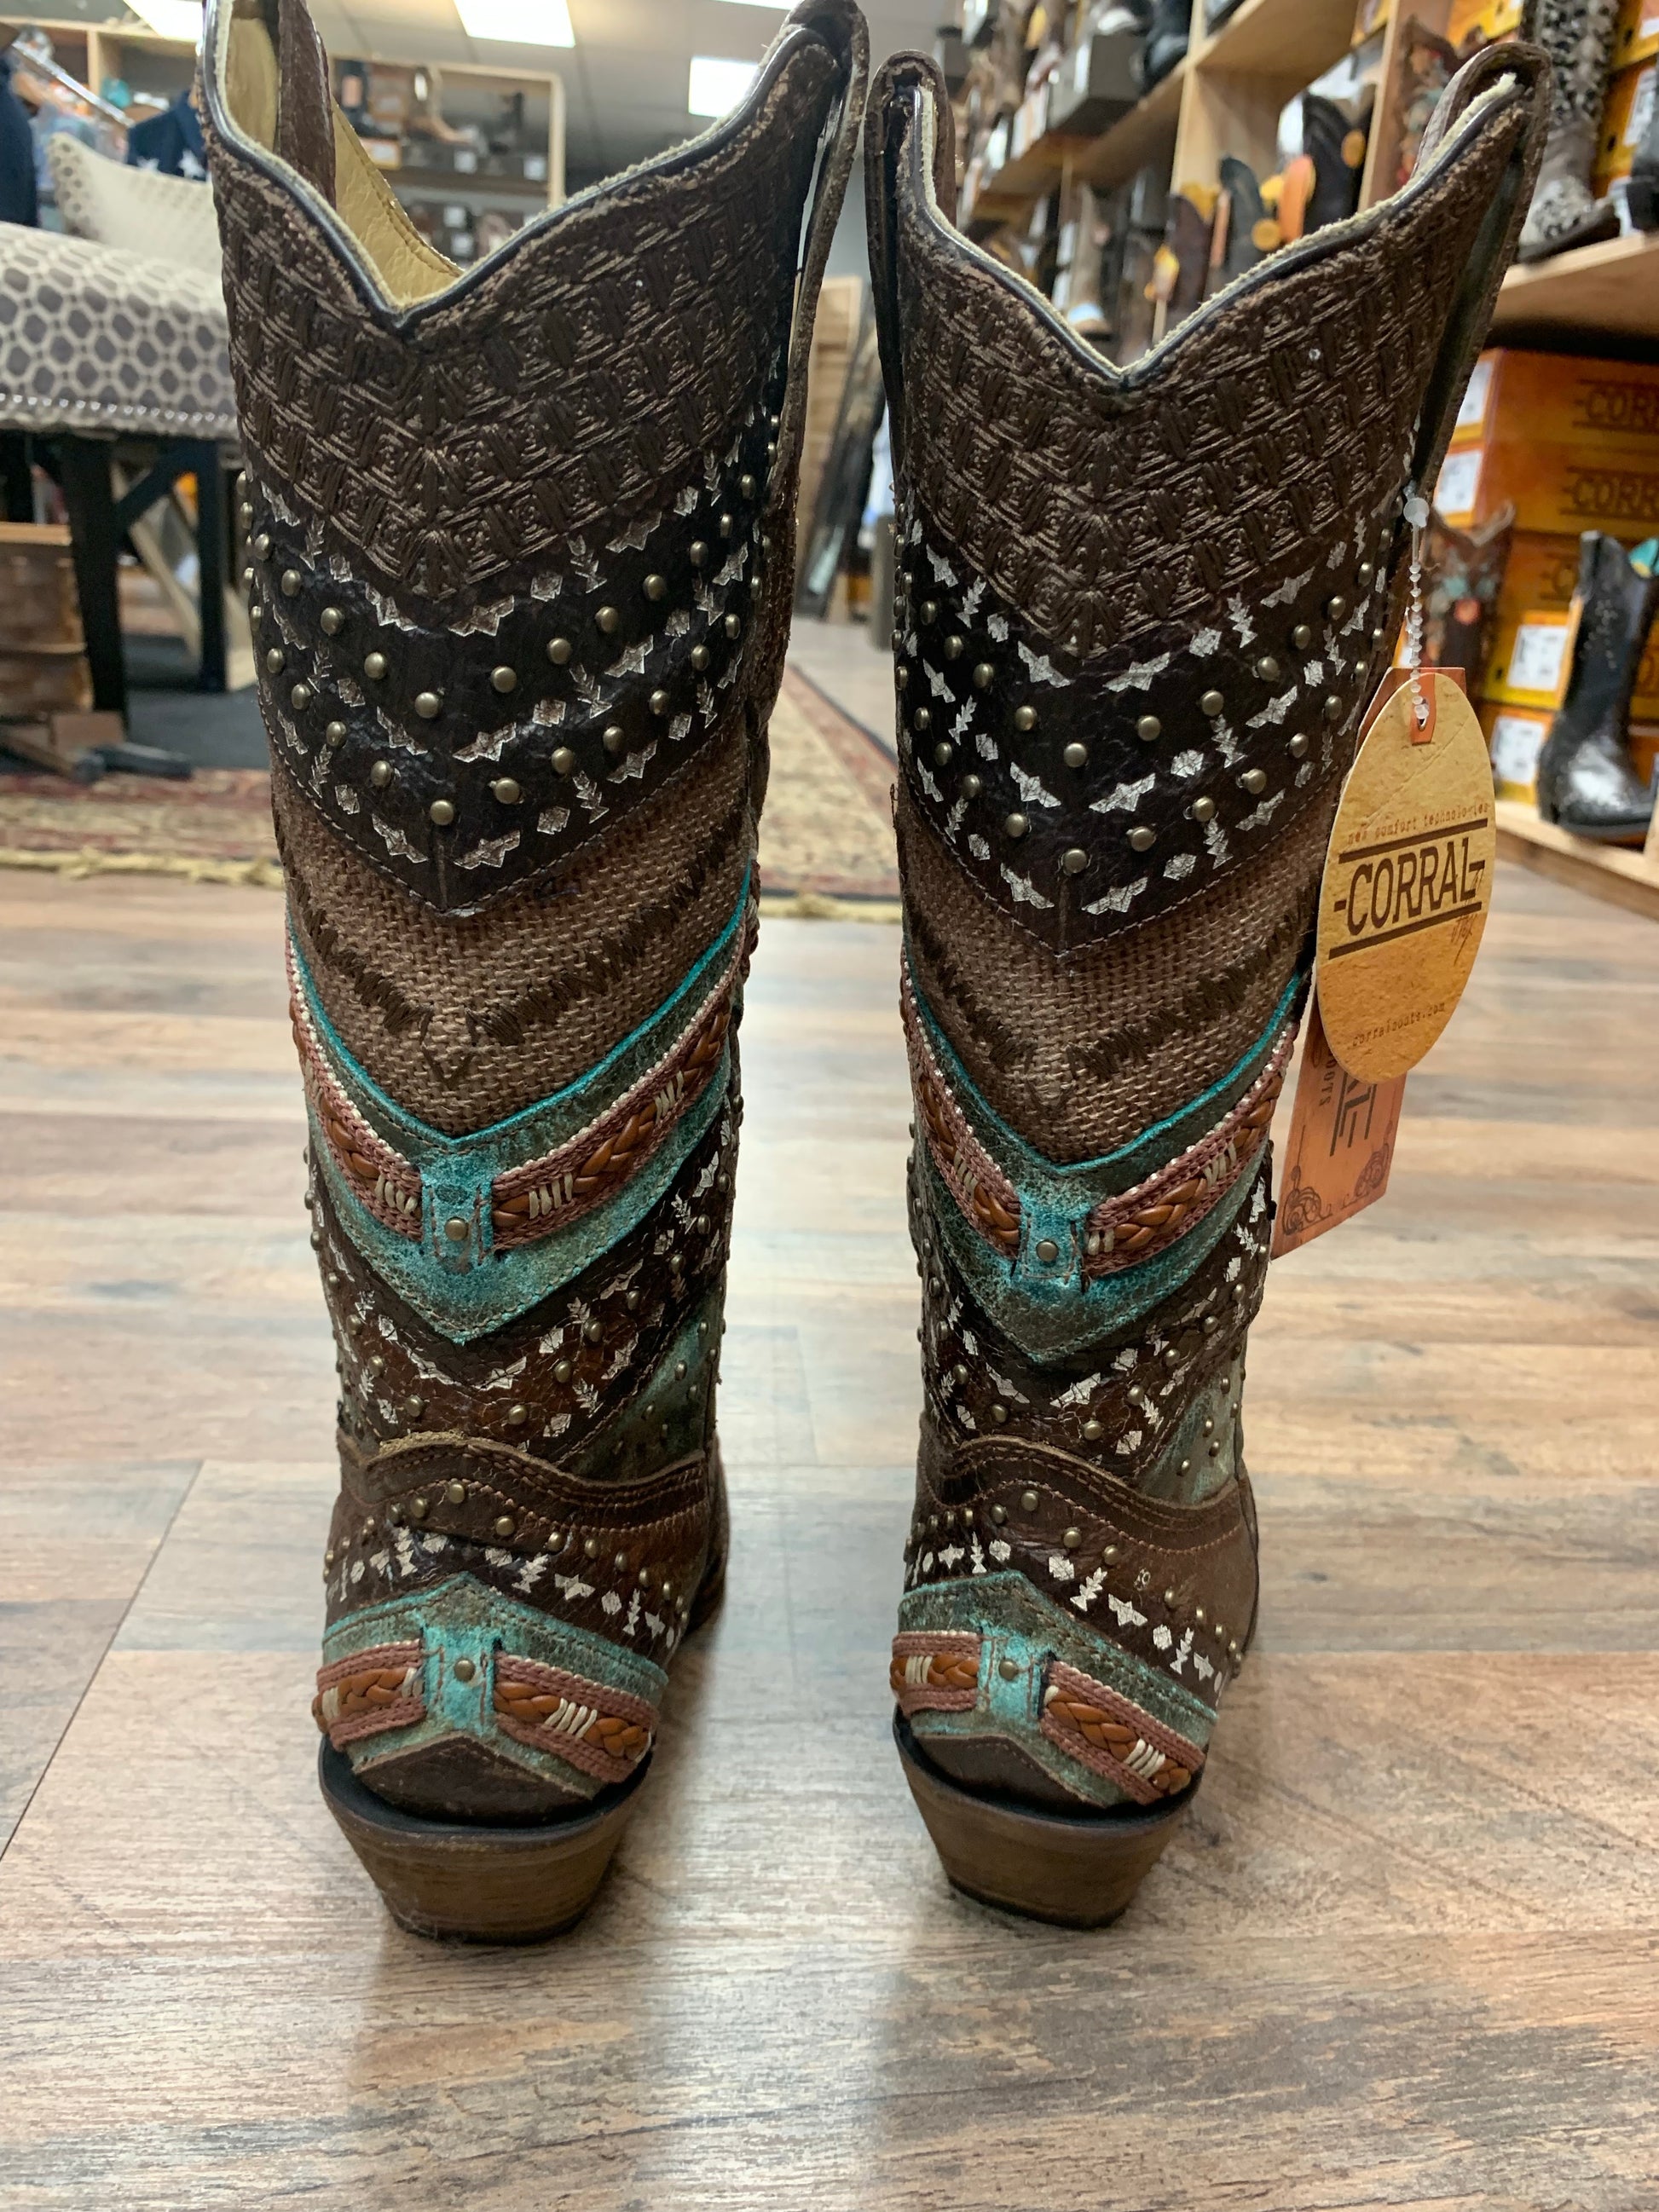 CORRAL WOMEN'S EMBROIDERY AND STUDS SNIP TOE WESTERN BOOTS A3381